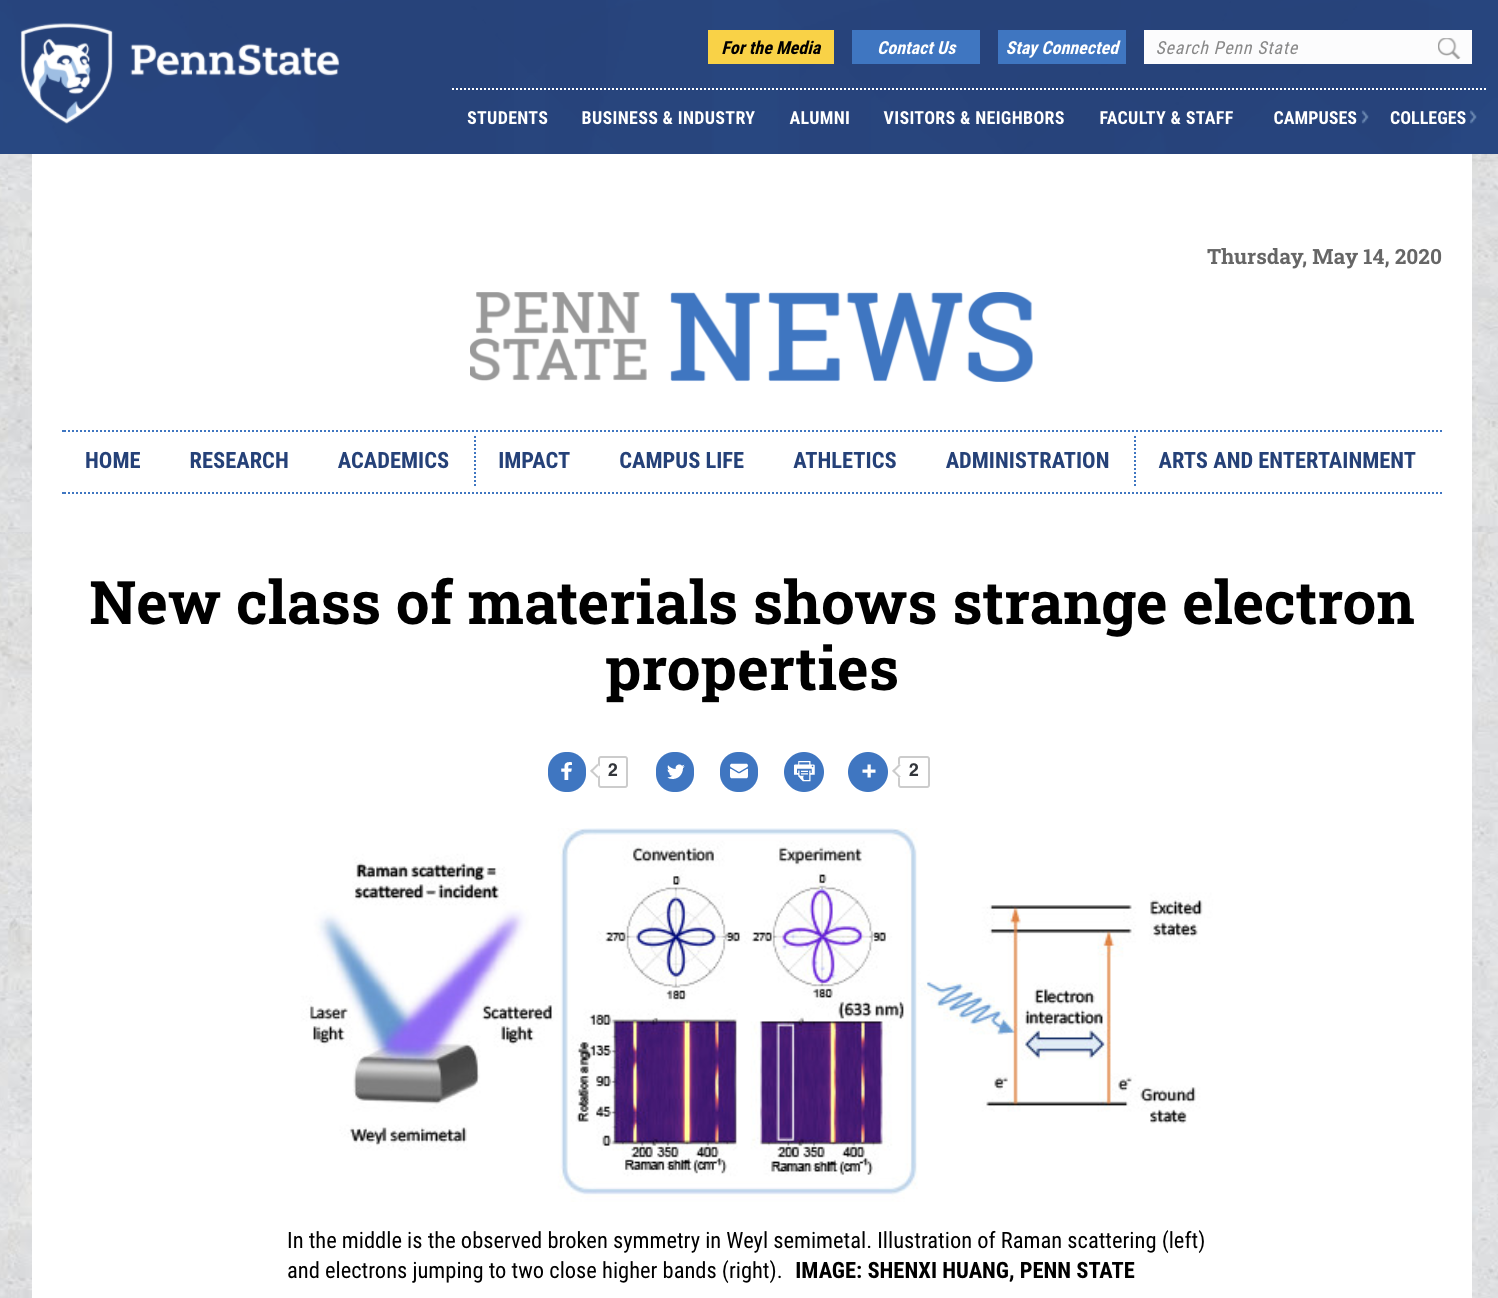 New class of materials shows strange electron properties